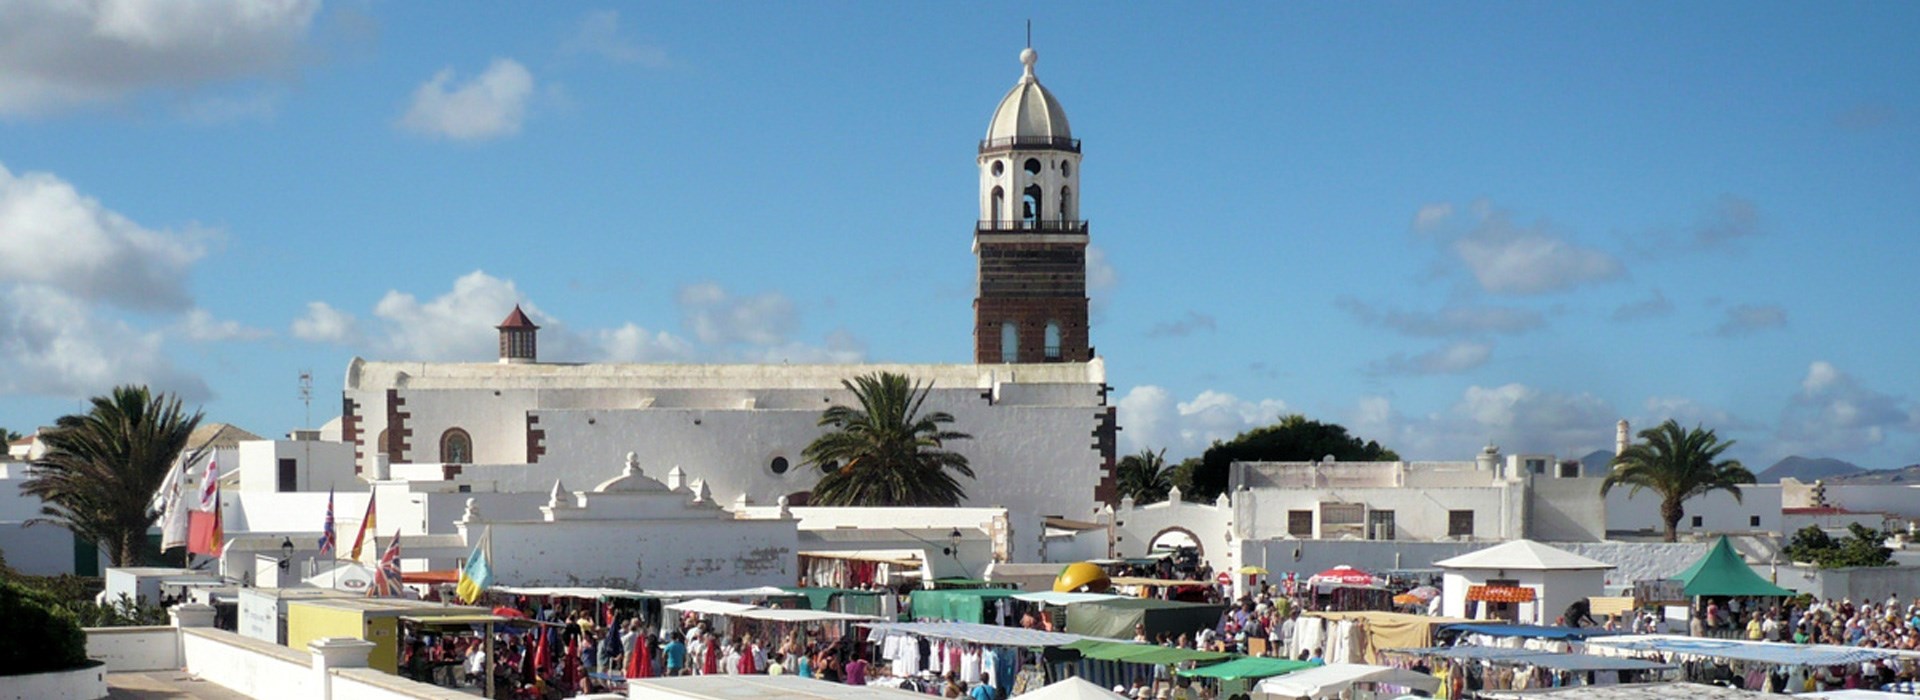 Visiter Teguise (Lanzarote) - Canaries